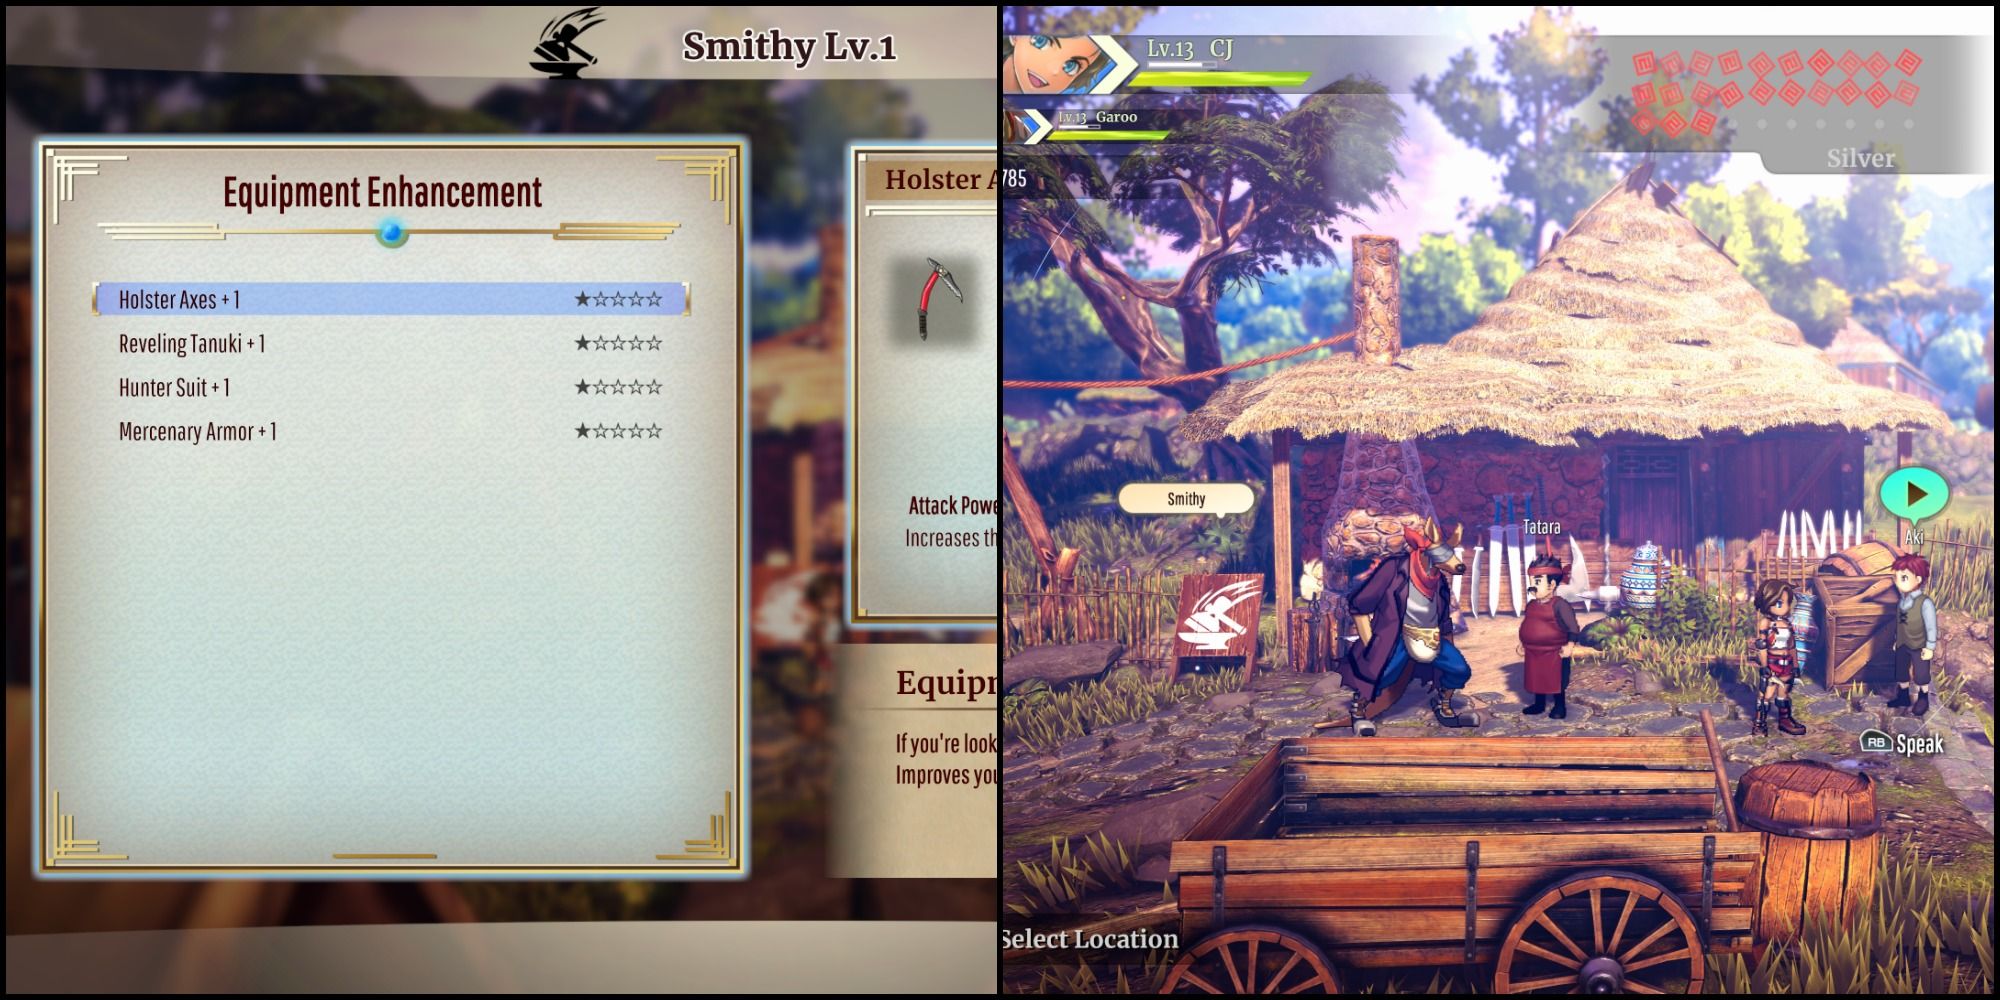 Split image of the Smithy menu on the left and Tatara on the right.